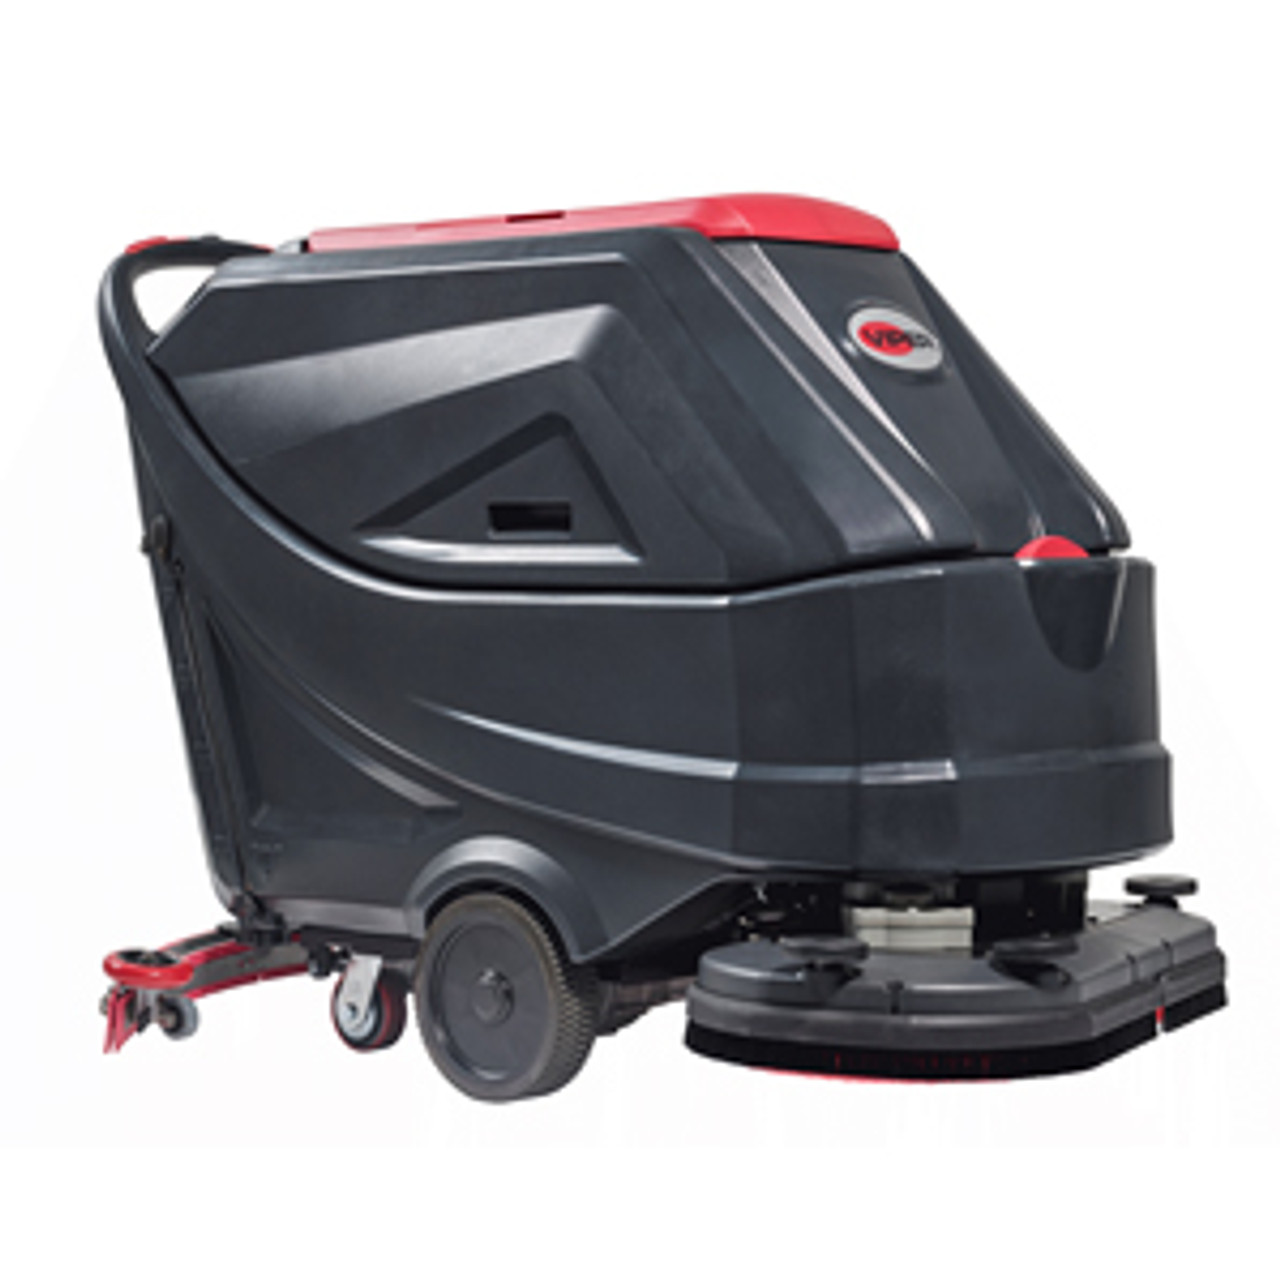 Viper AS7690T floor scrubber walk behind battery powered traction drive 30  inch 22 gallon with pad holders 242 ah batteries